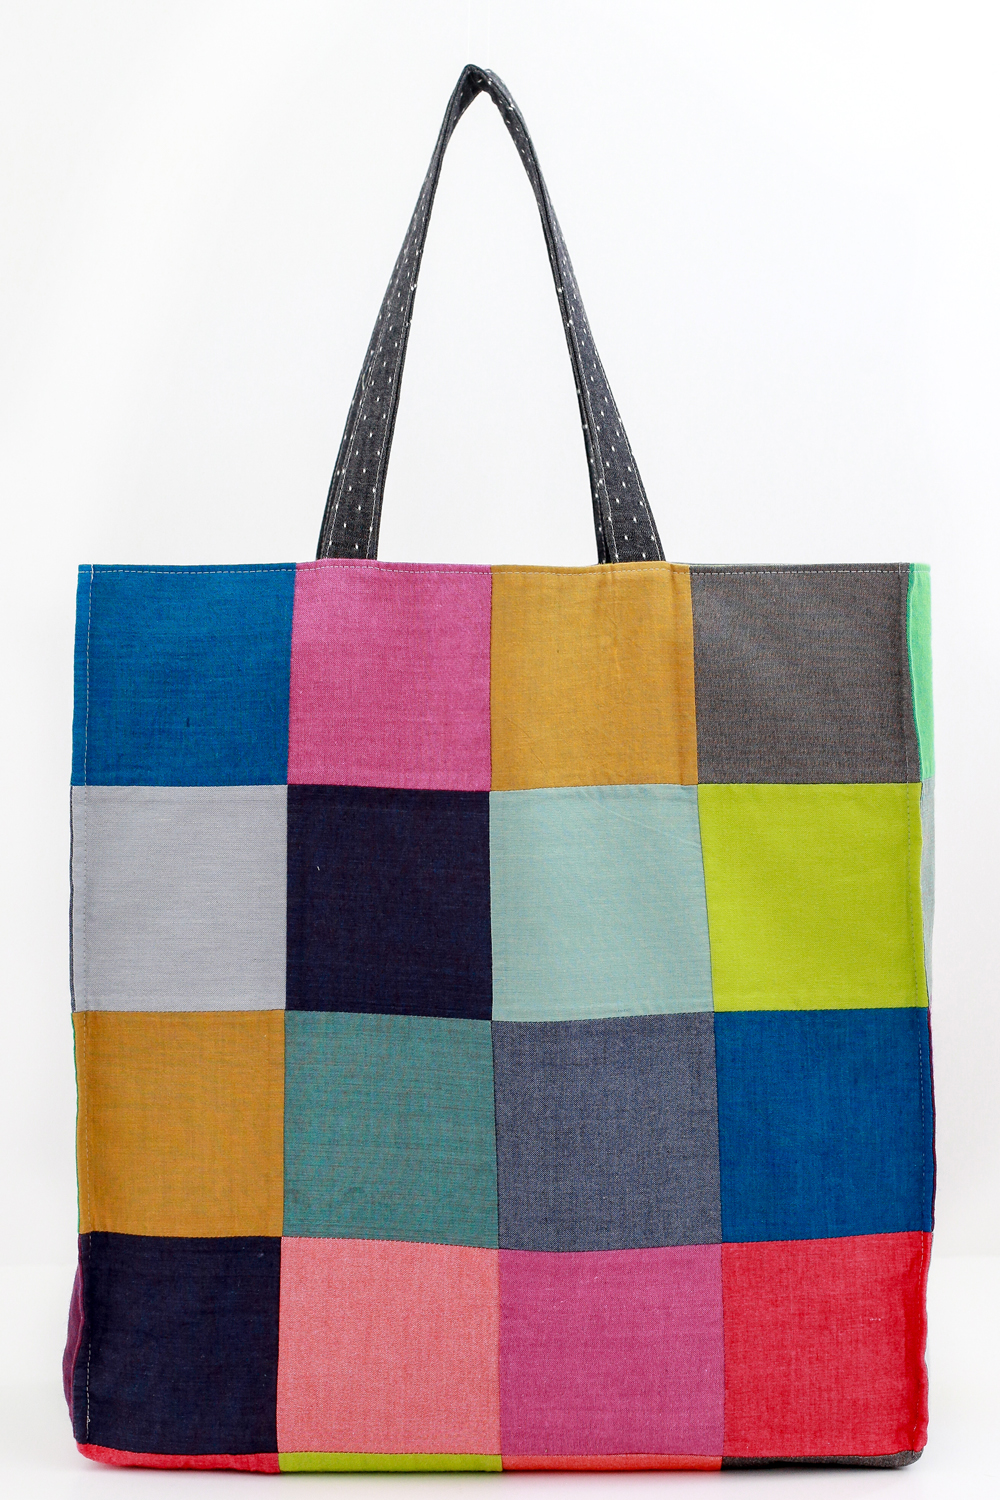 In Color Order: Workshop Tote Sew Along: Fabric Options